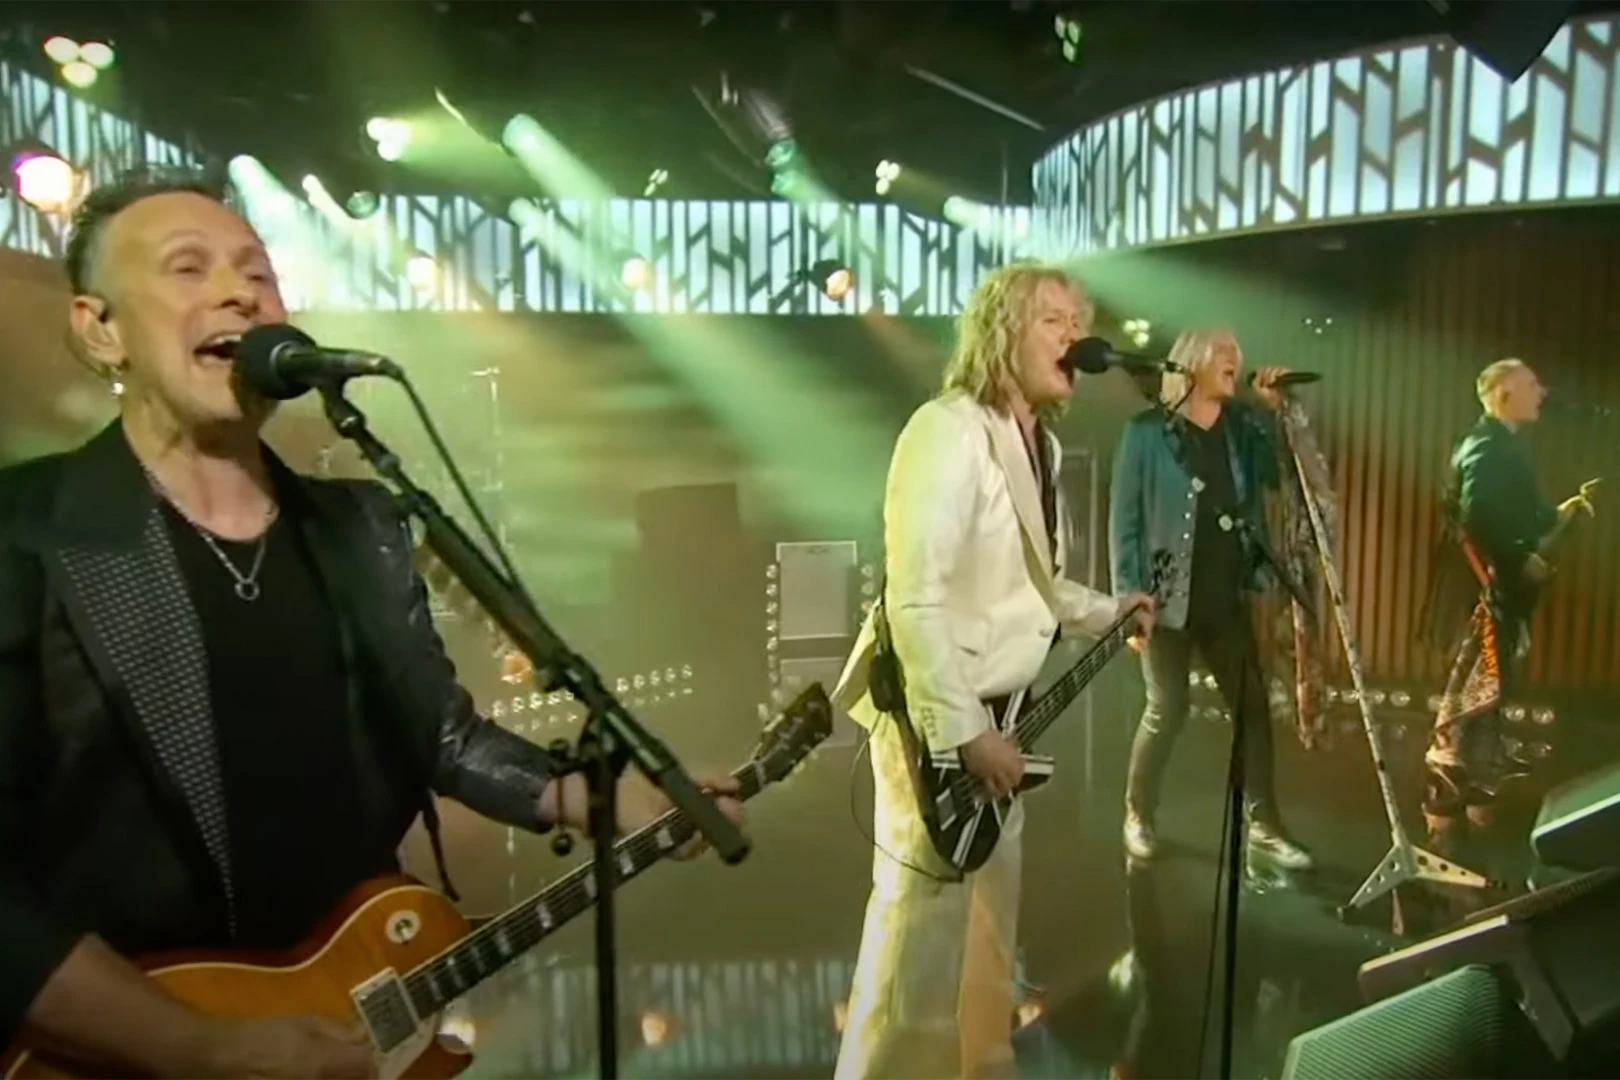 Watch Def Leppard Play Classic Hits on ‘Jimmy Kimmel Live!’